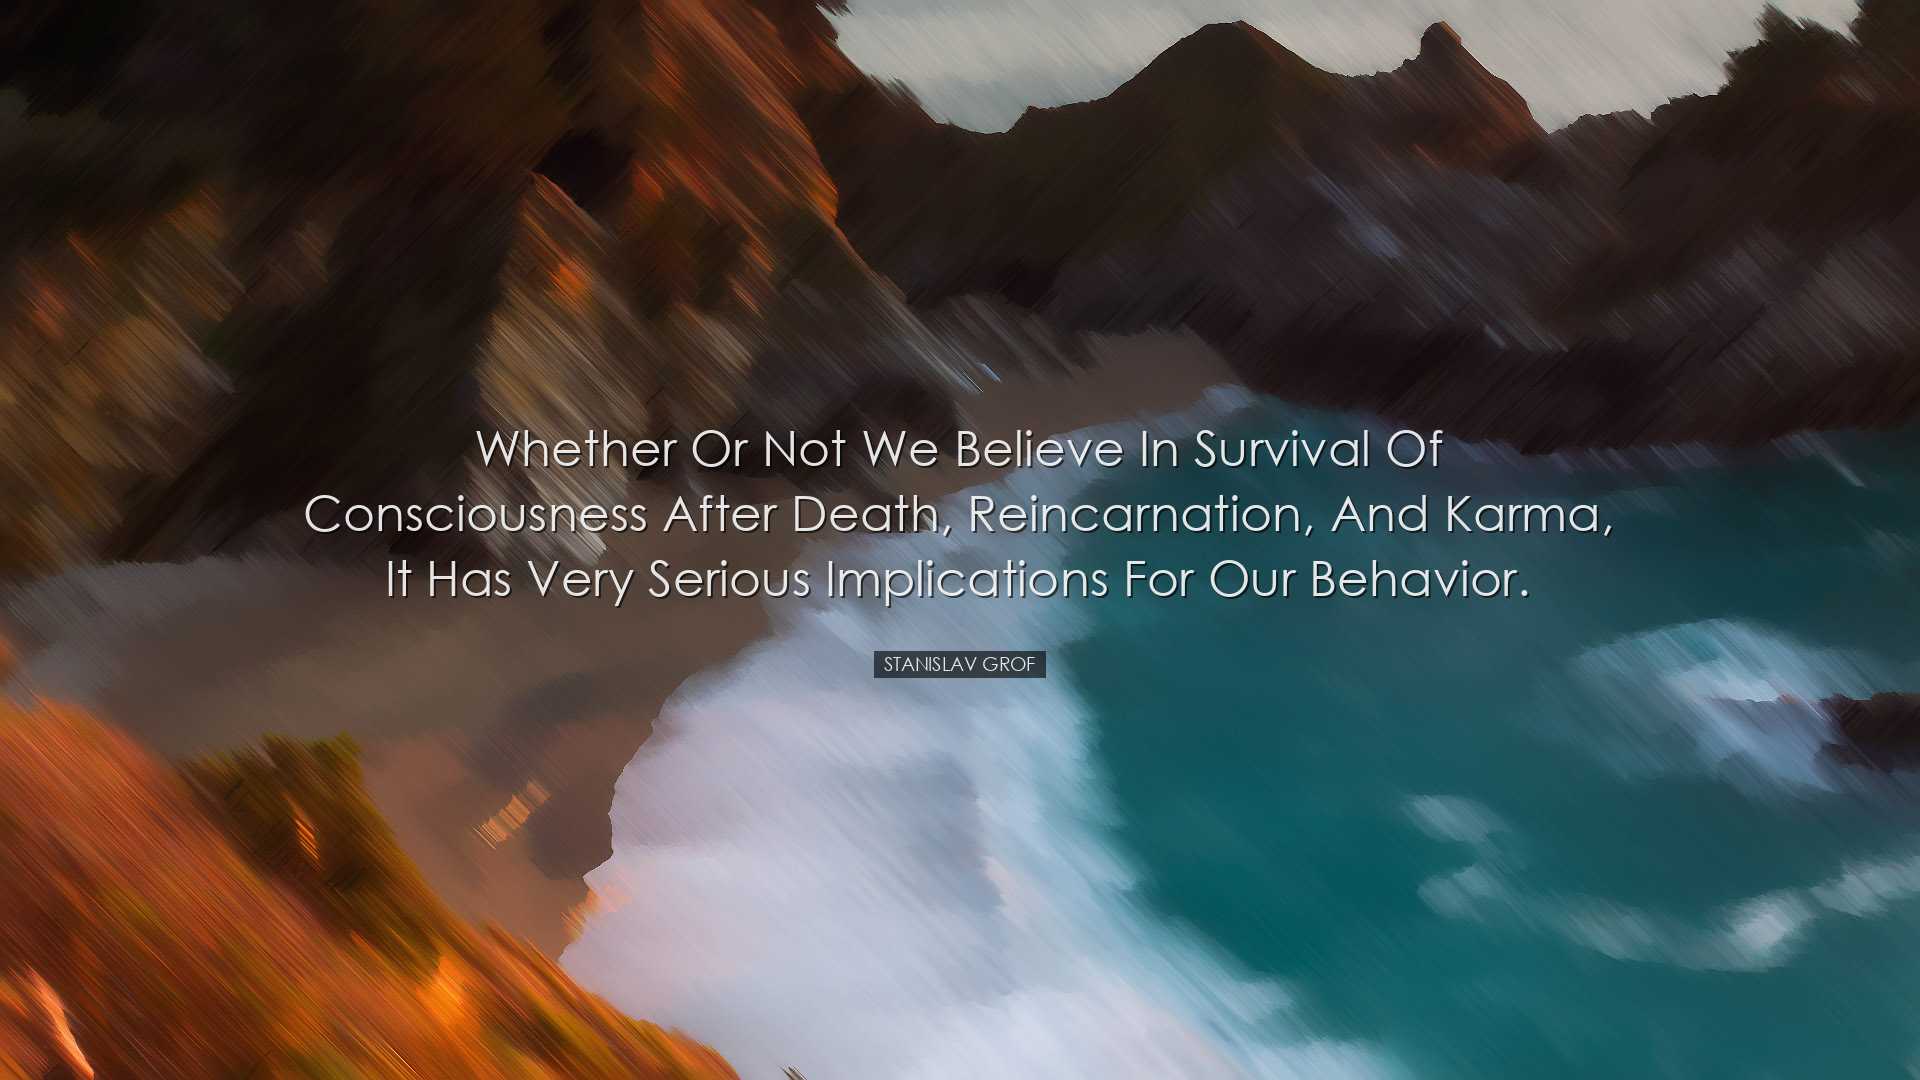 Whether or not we believe in survival of consciousness after death